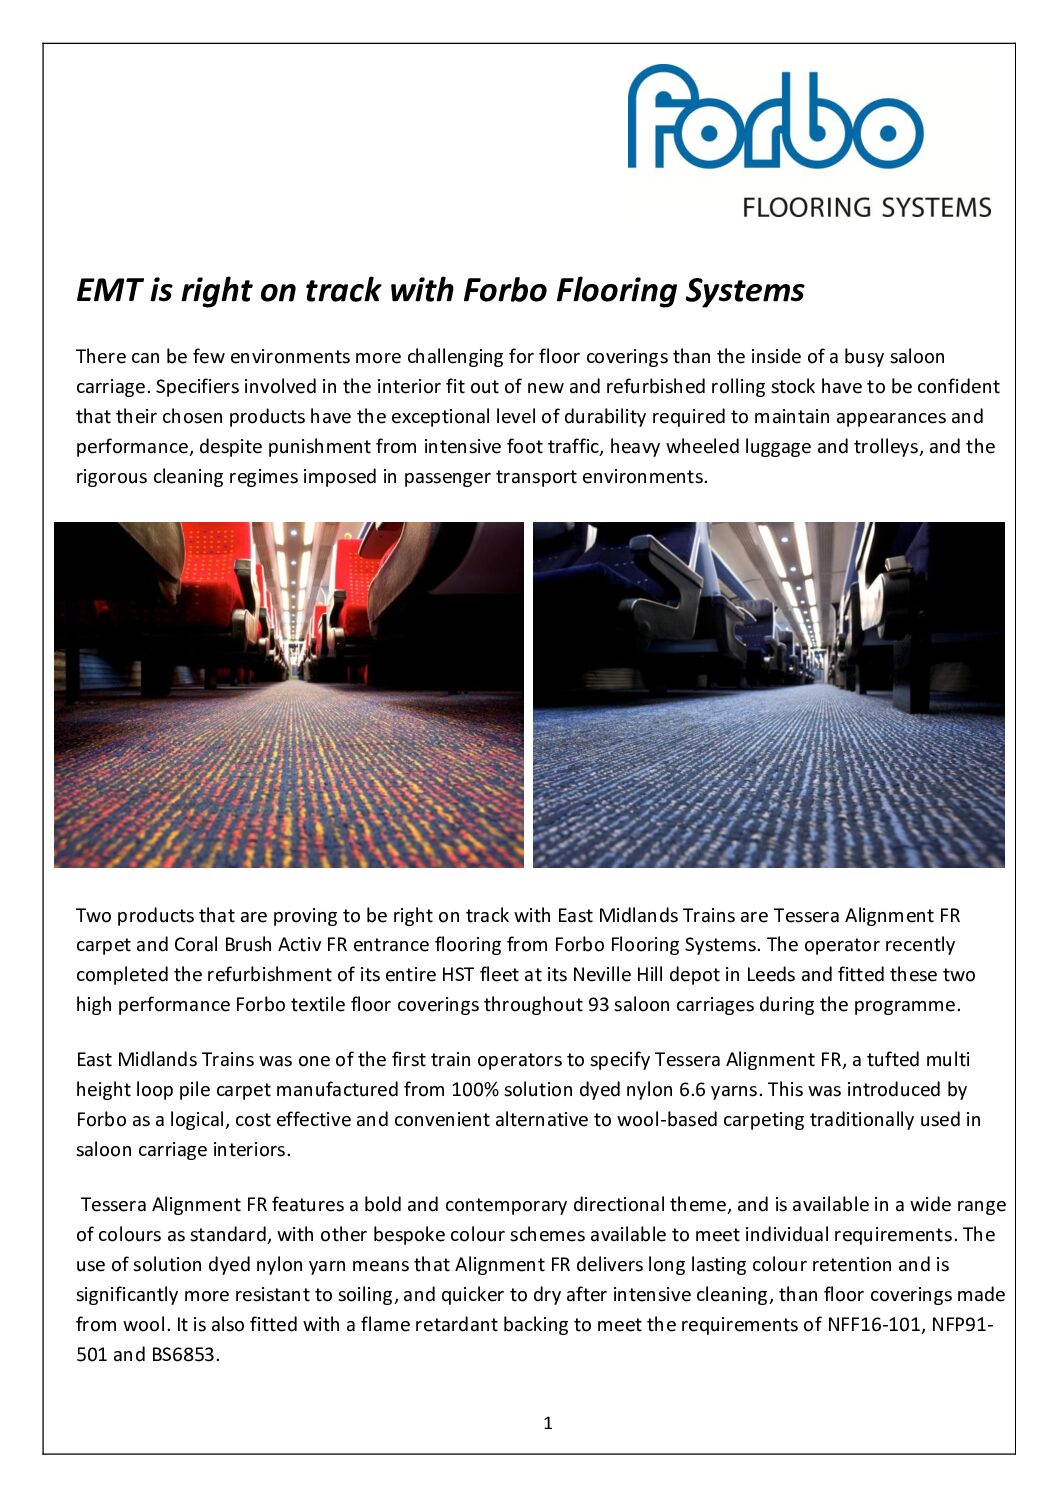 Forbo Flooring – East Midlands Trains Case Study